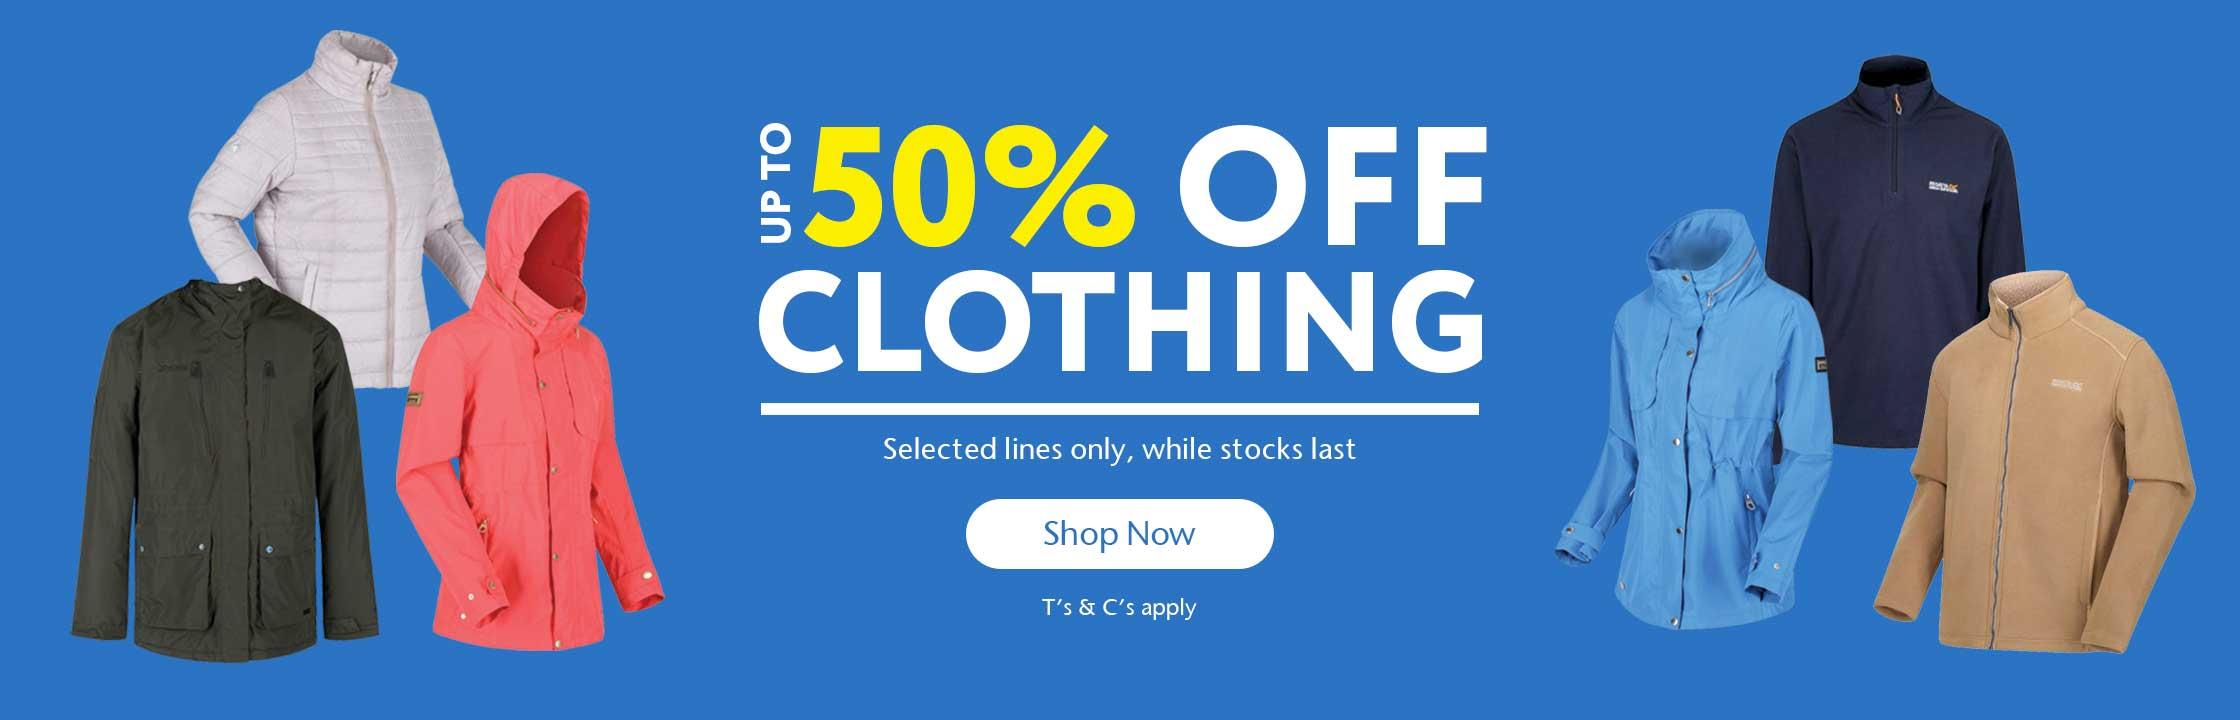 Up To 50% OFF Clothing 